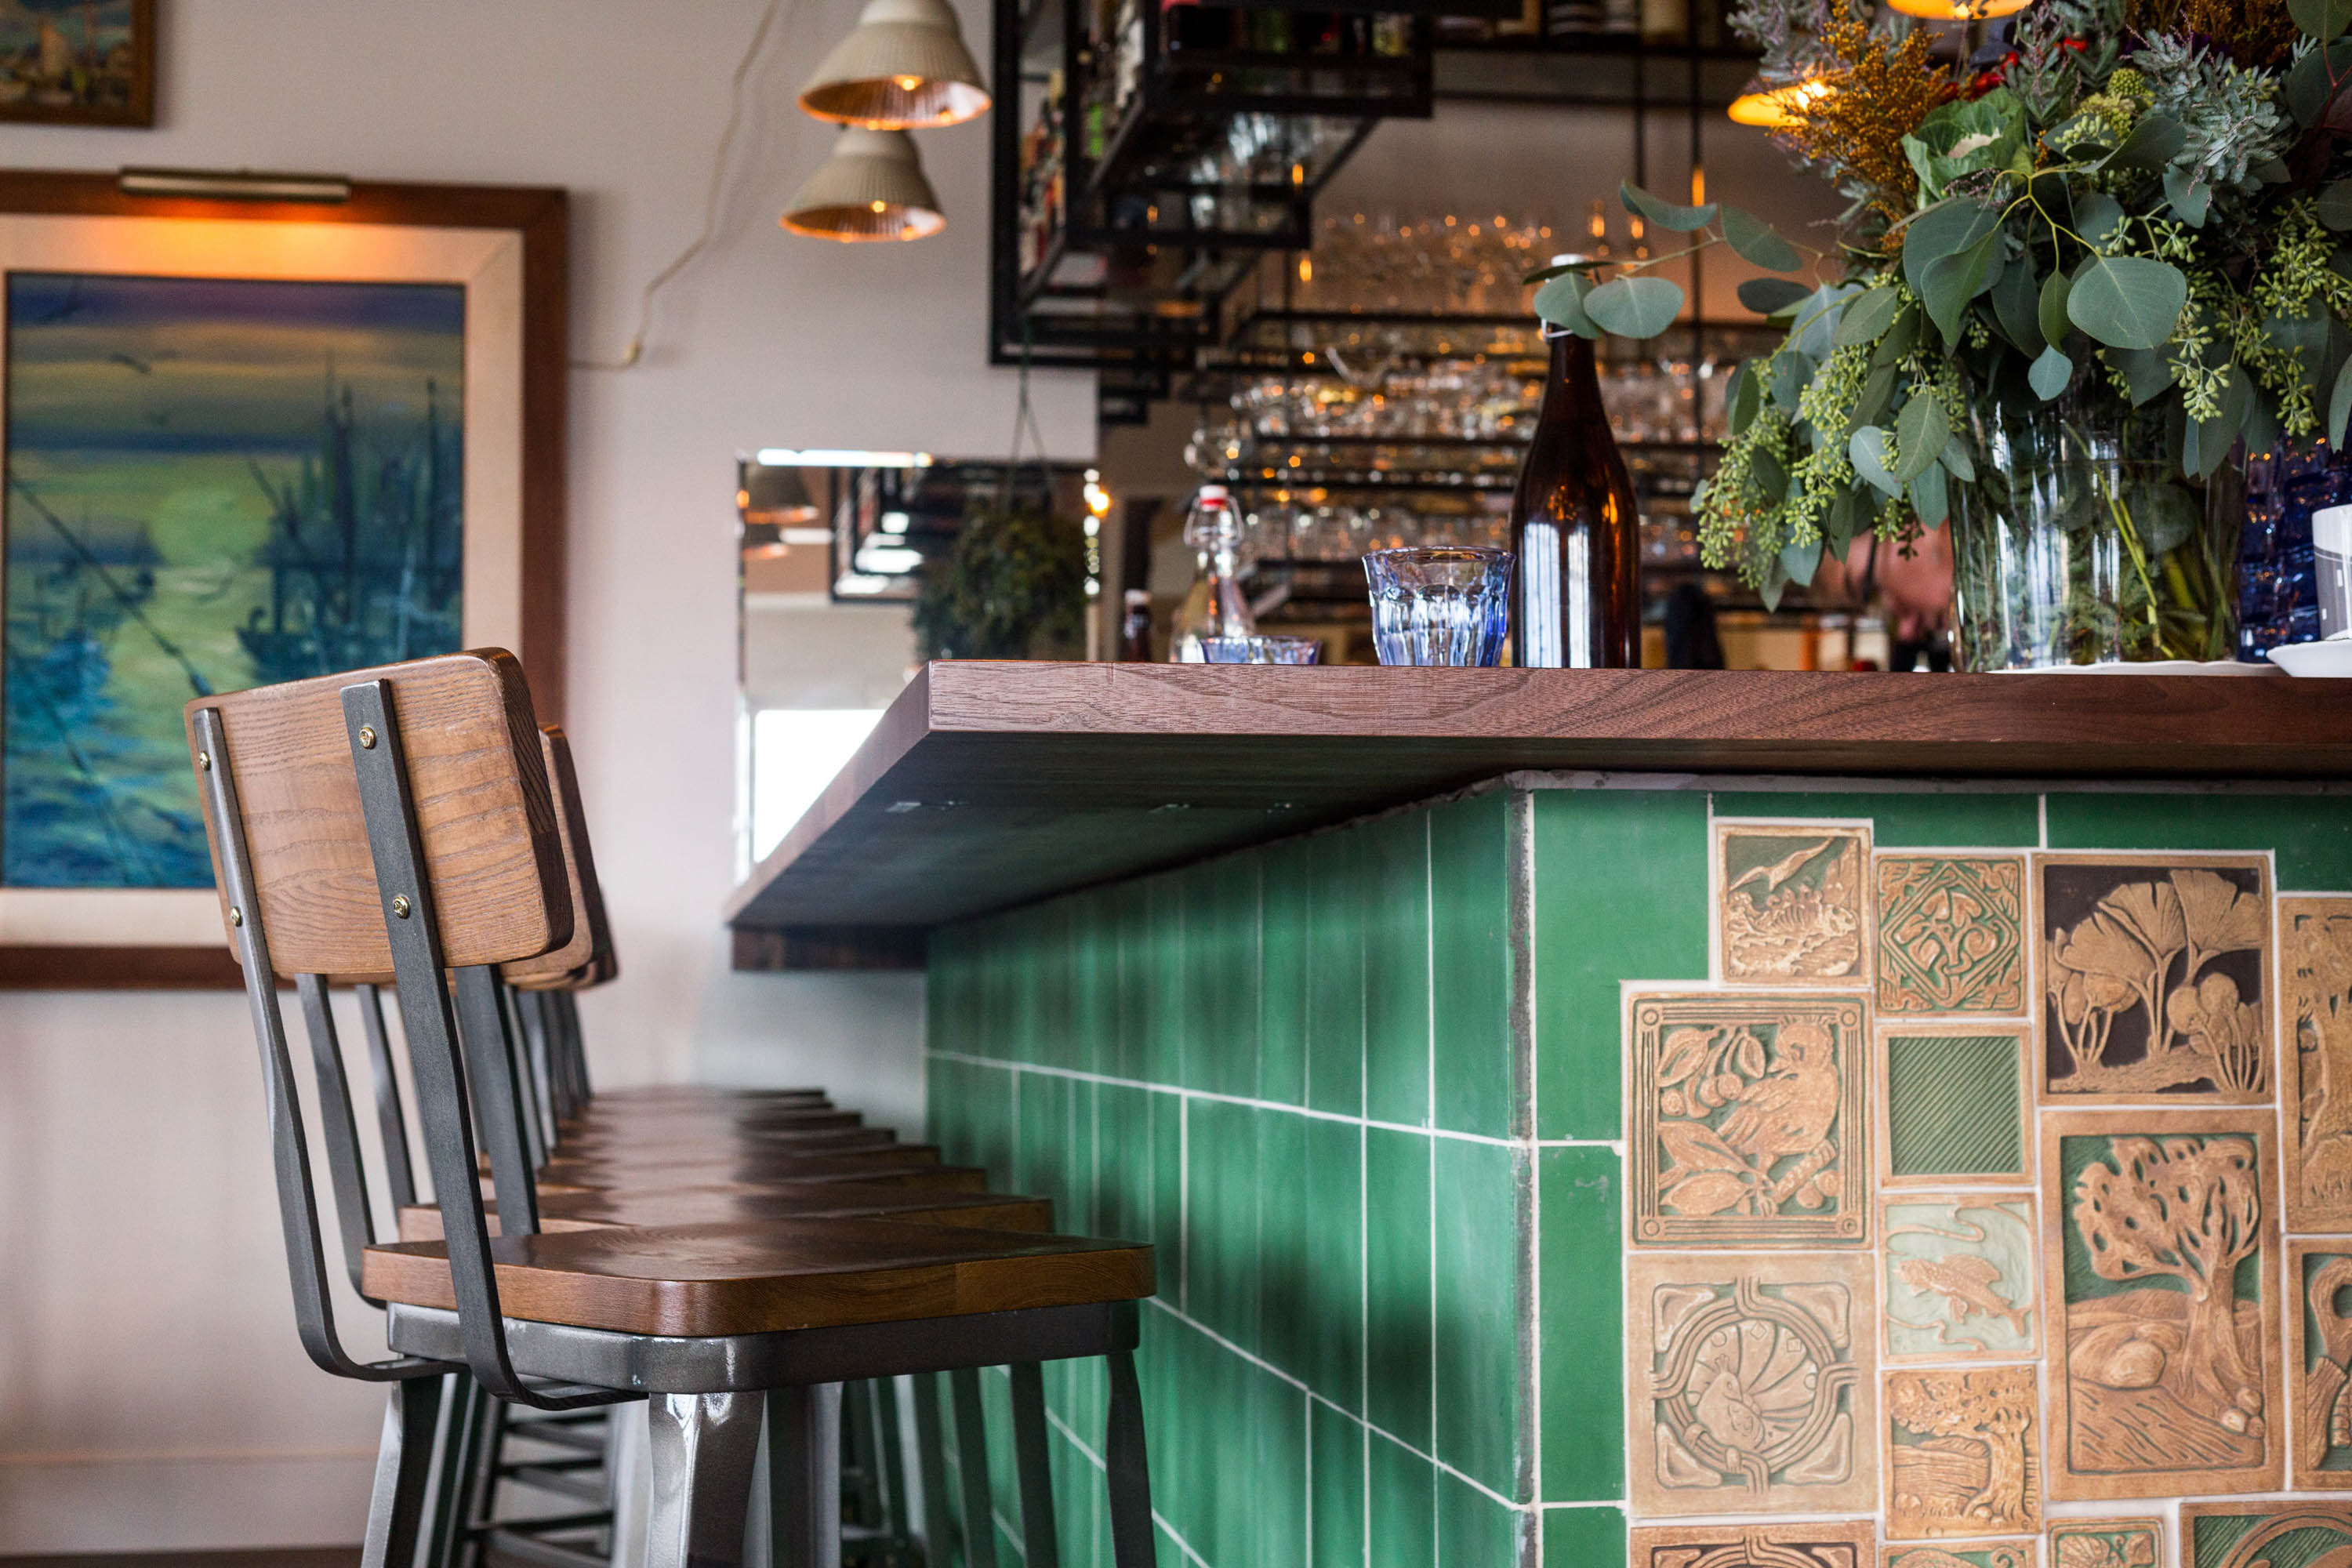 Detail shot of the bar featuring vibrant green pub tiles for a classic touch.